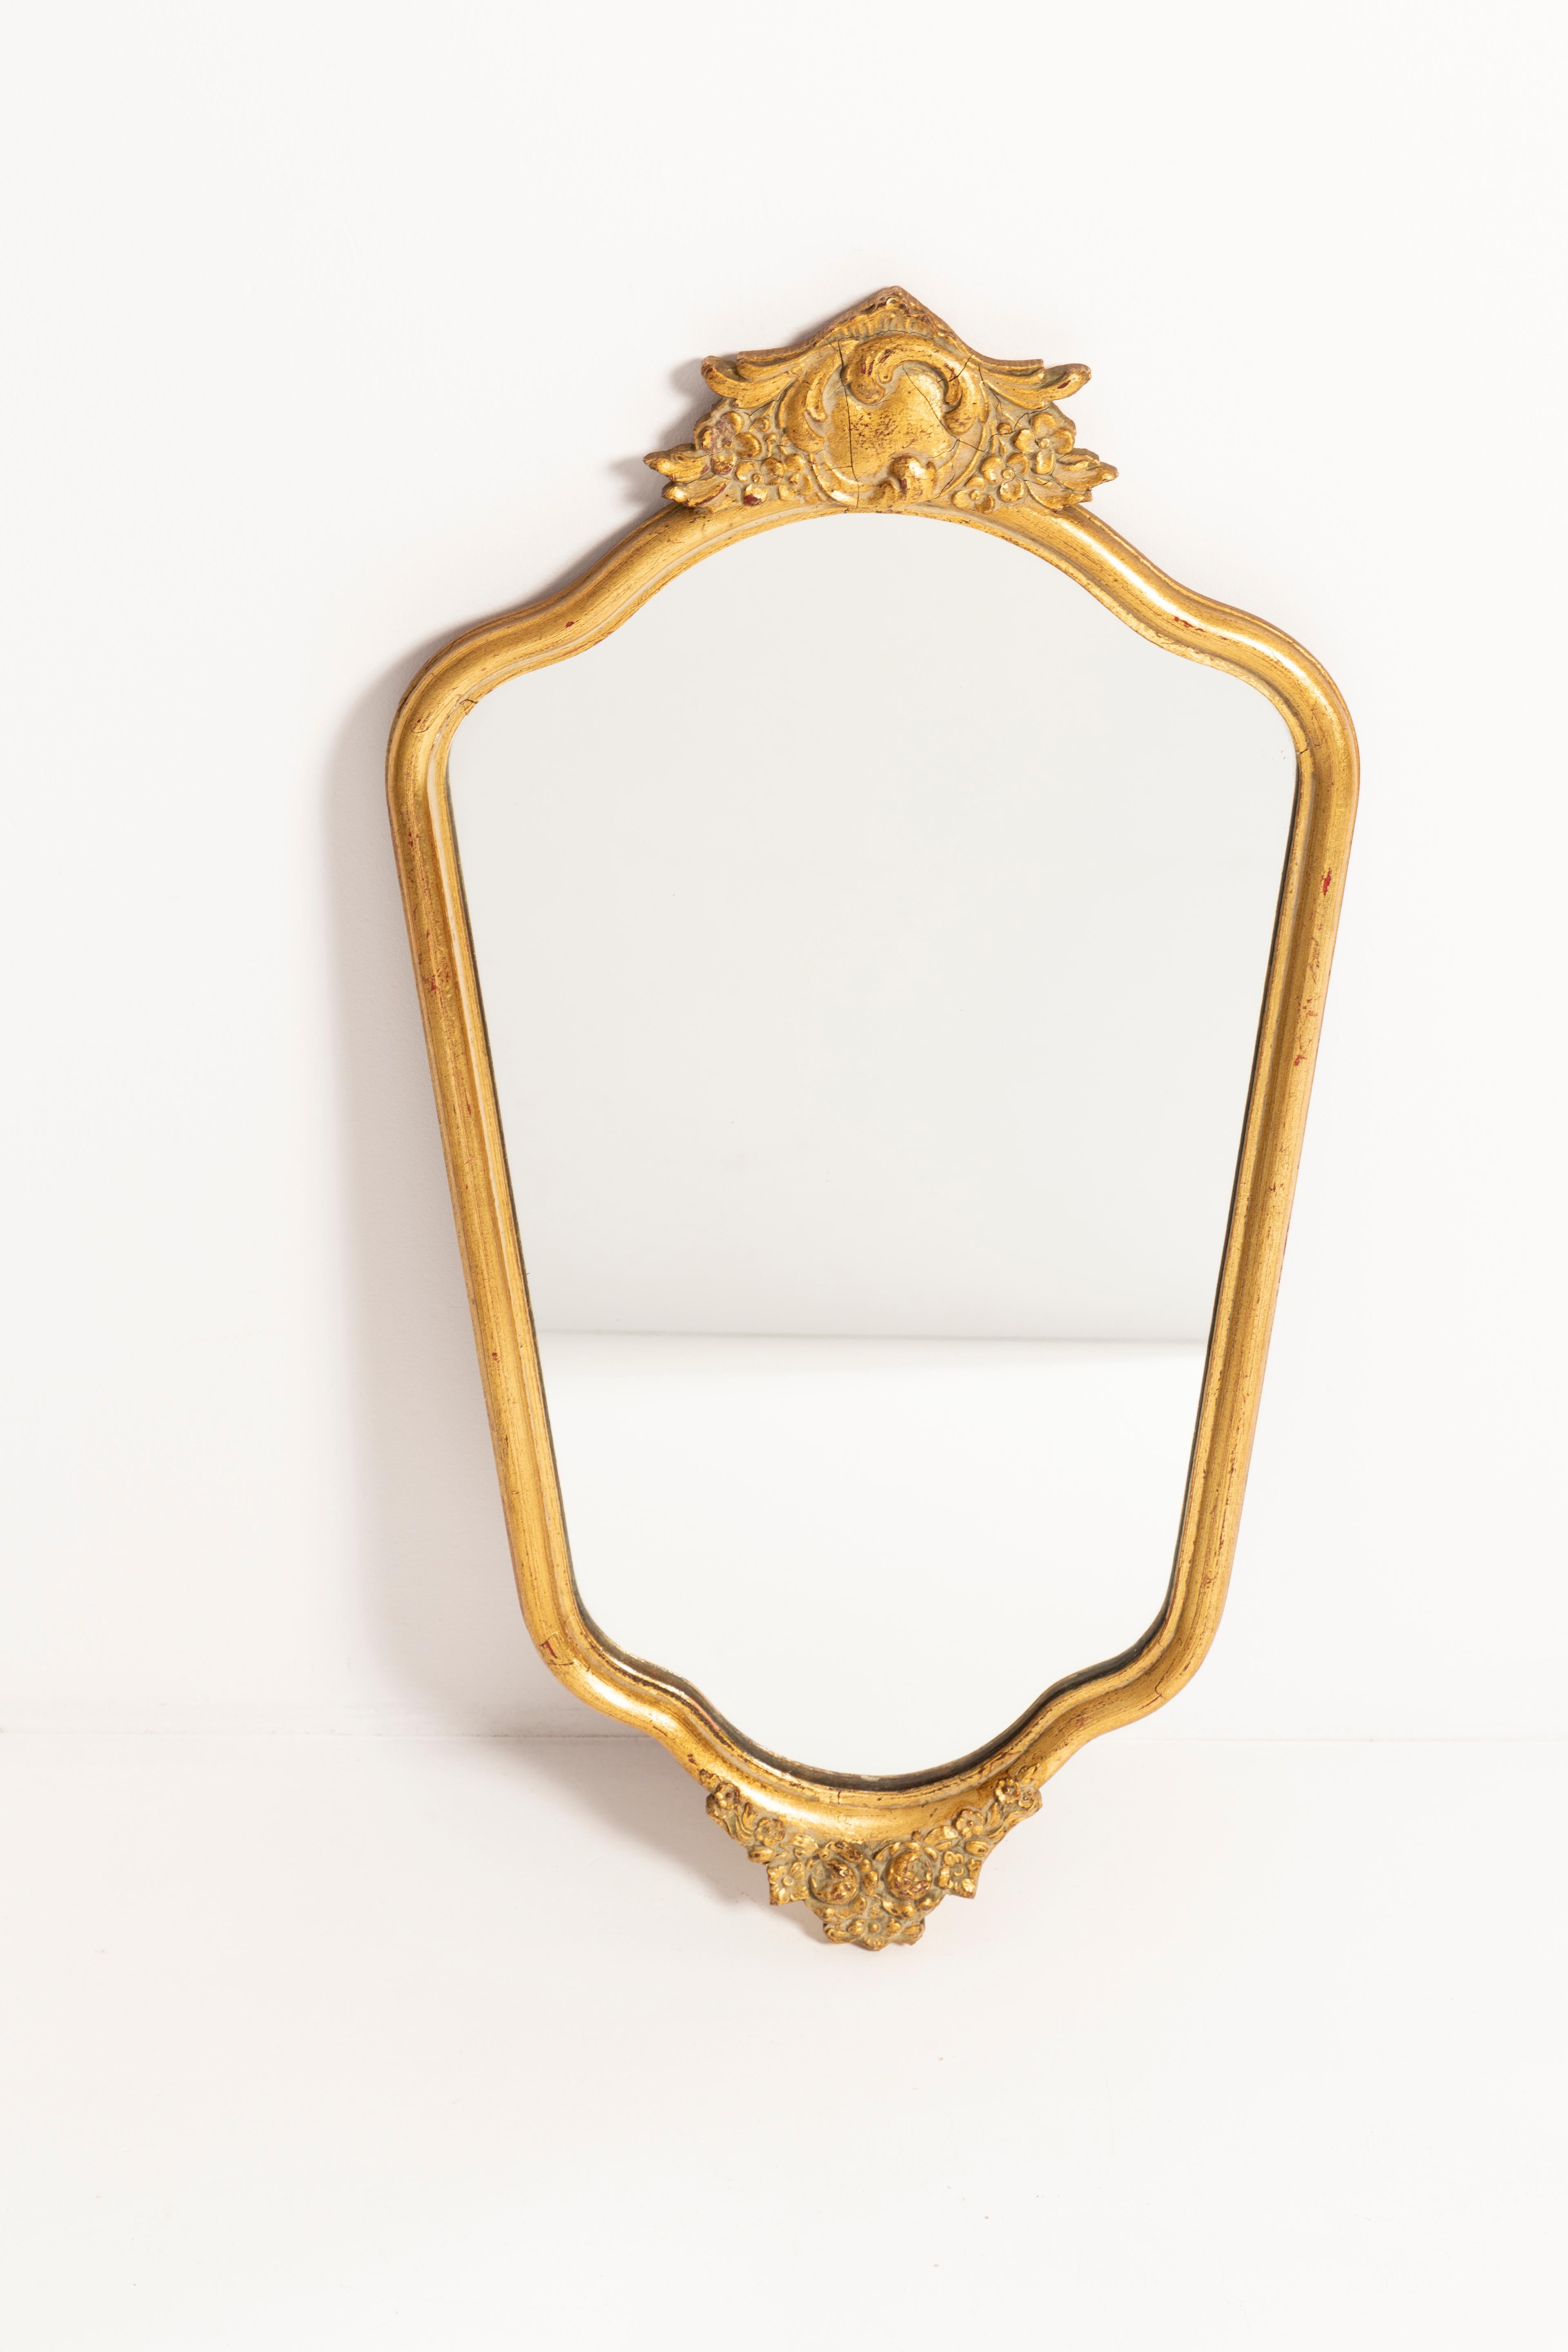 Beautiful mirror in a golden decorative frame from Italy. The frame is made of wood. Mirror is in very good vintage condition, no damage or cracks in the frame. Original glass. Beautiful piece for every interior! Only one unique piece.